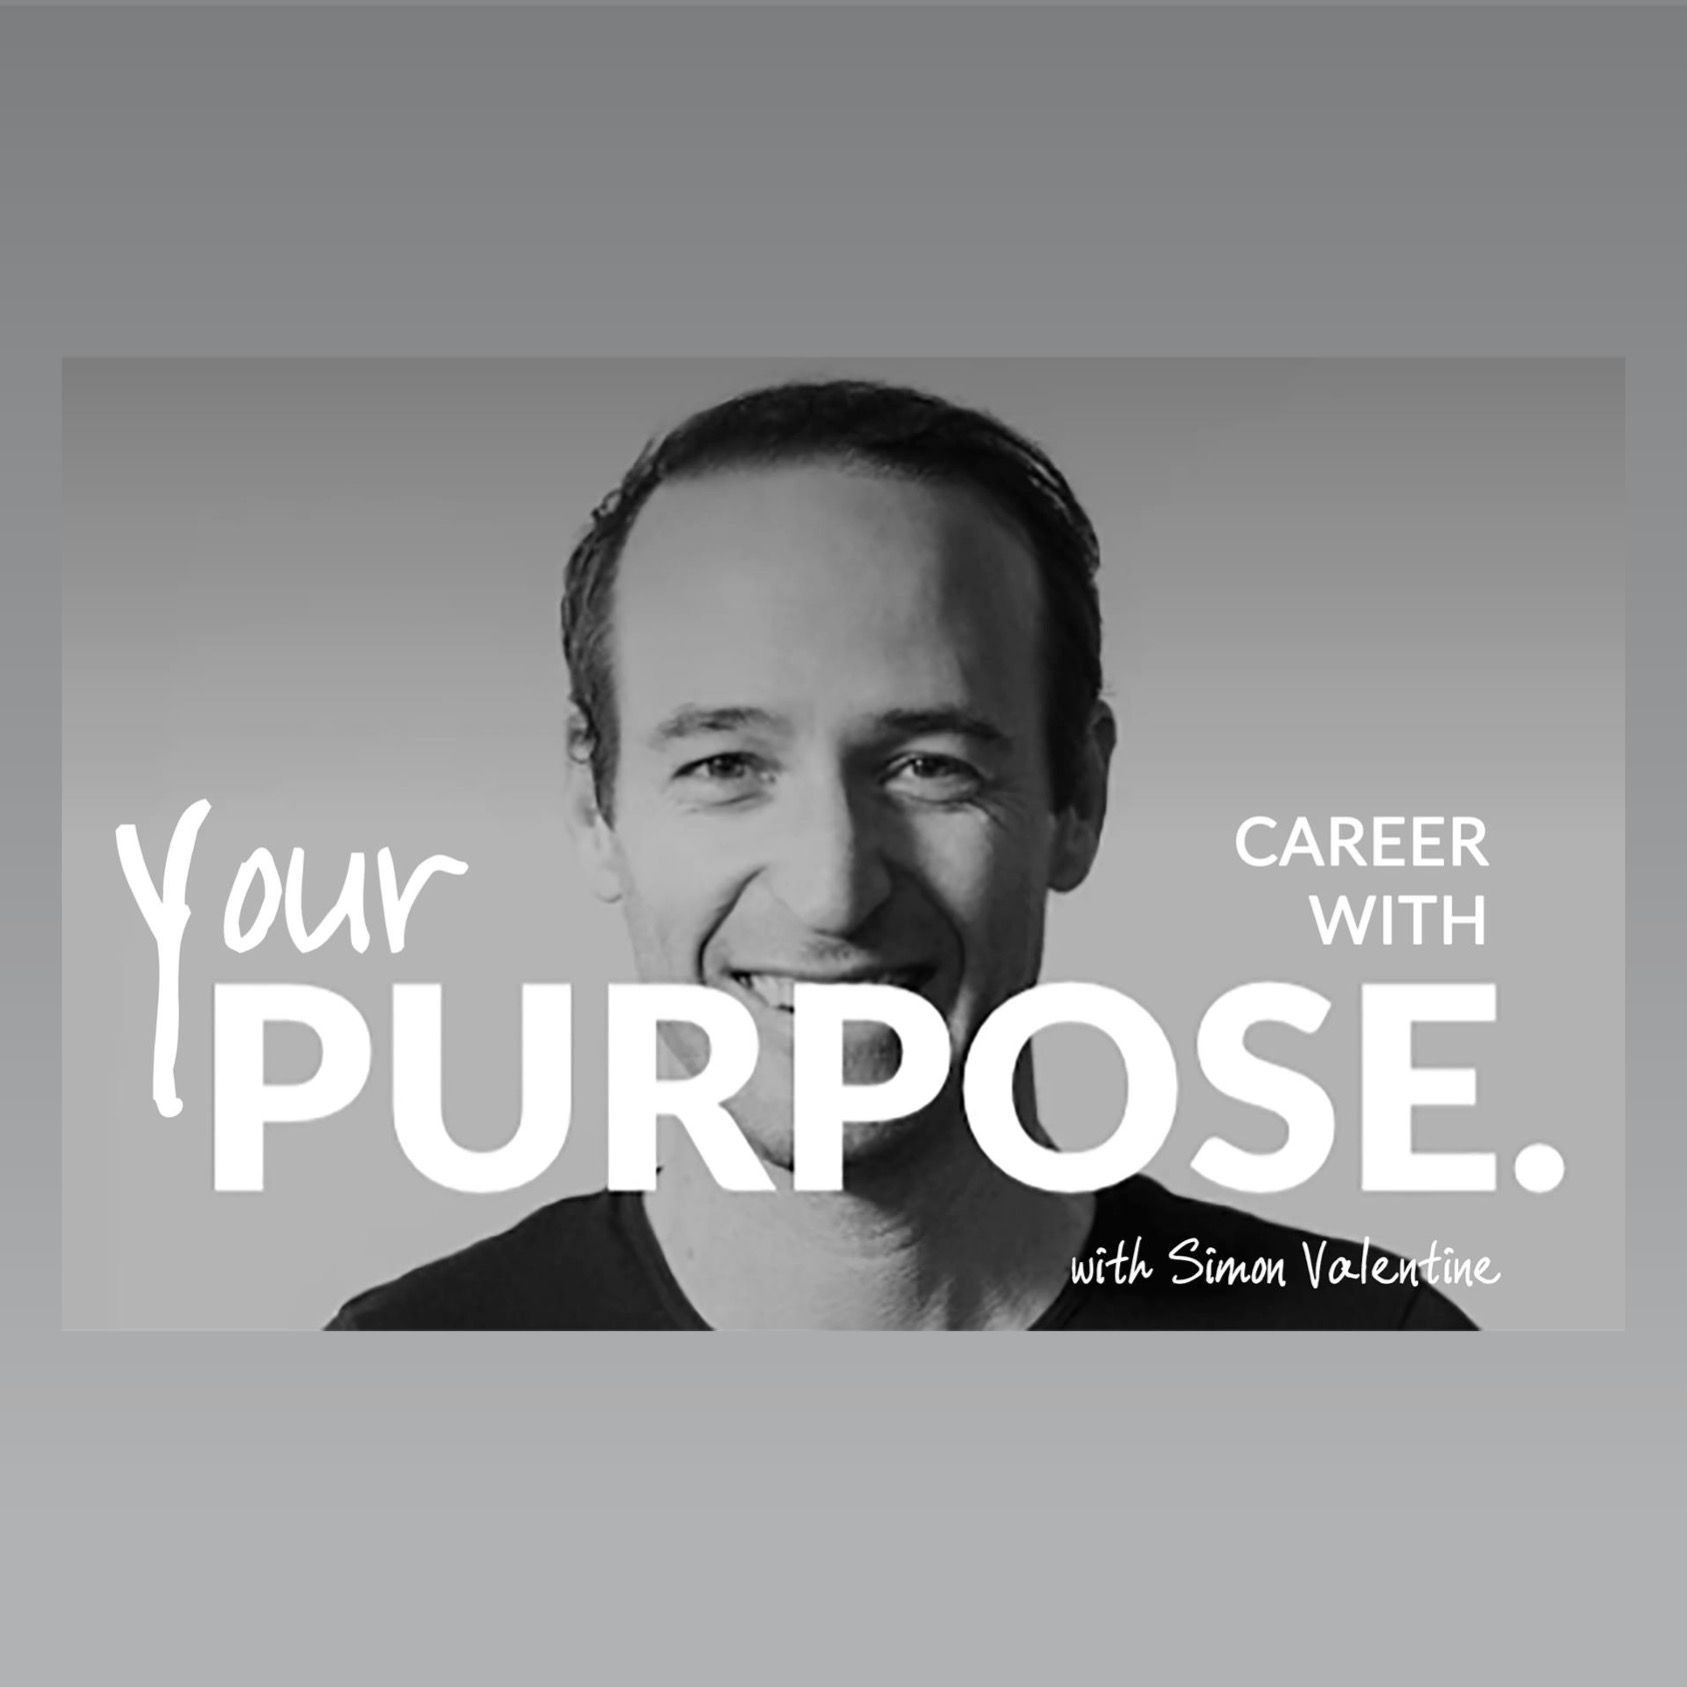 Your Career with PURPOSE